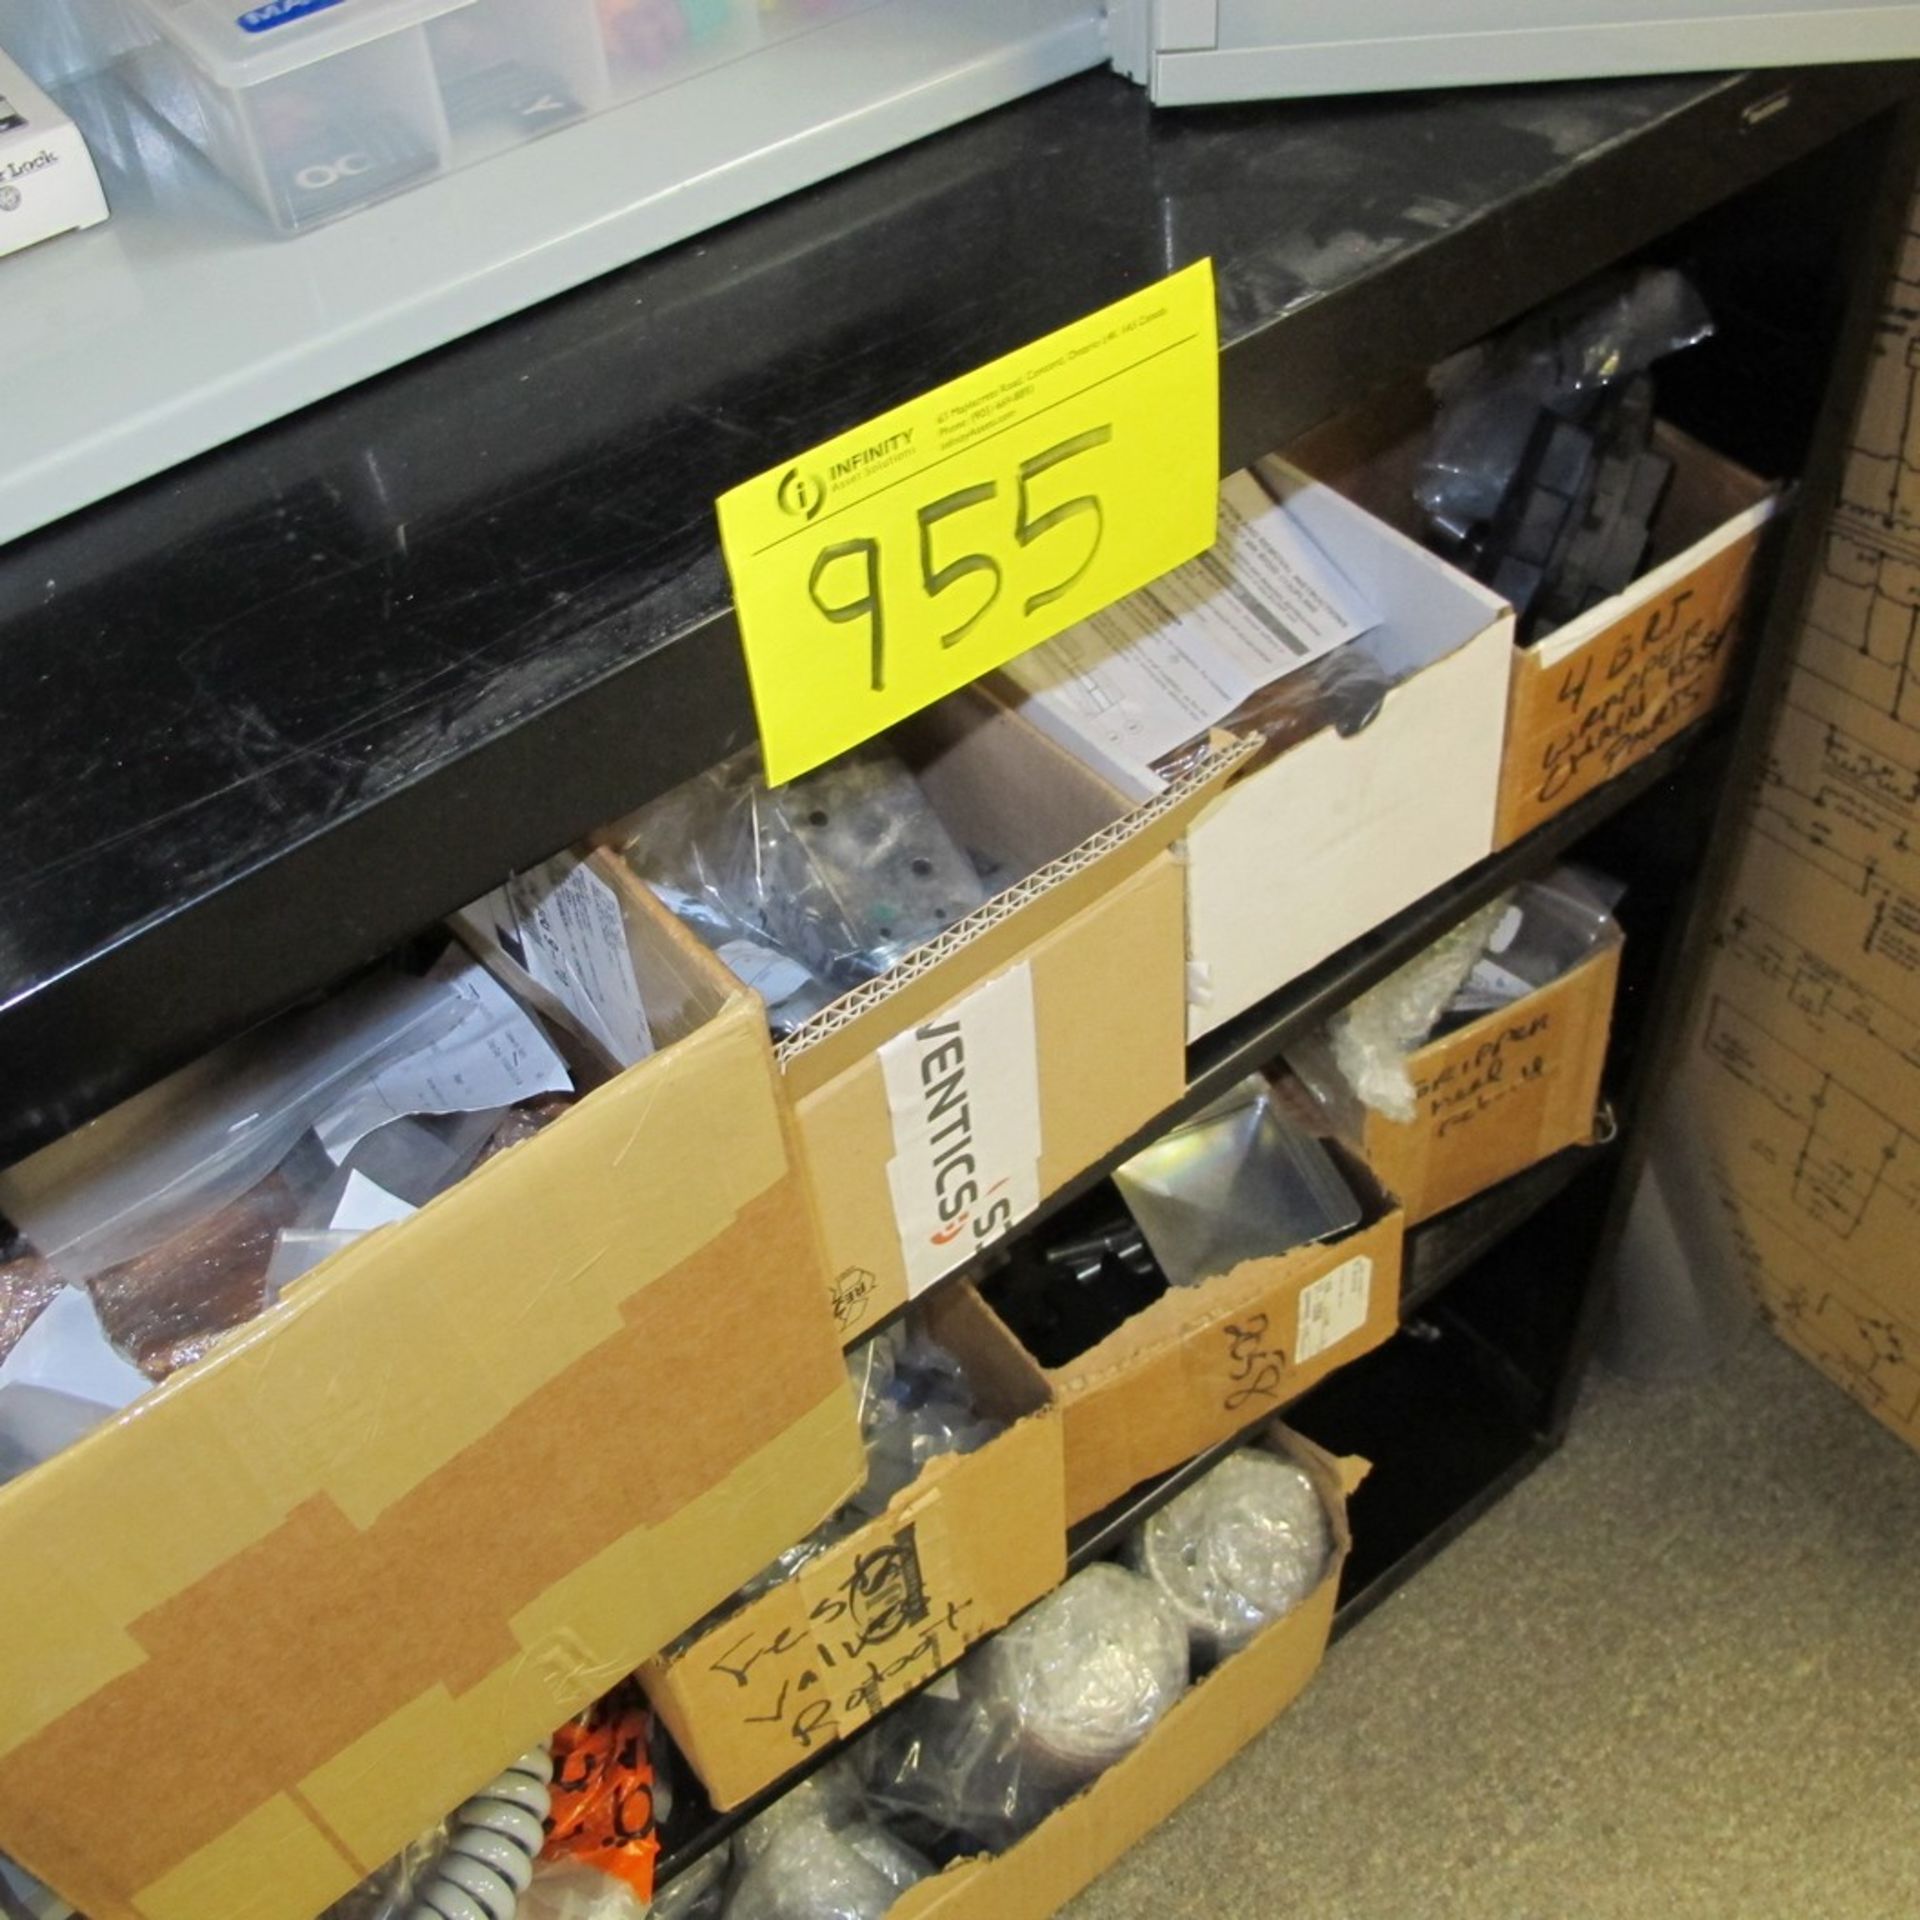 LOT OF (3) SHELVING UNITS/CABINETS W/ PARTS AS LABELLED AND SUPPLIES (2ND FLOOR NORTH OFFICES) - Image 4 of 5